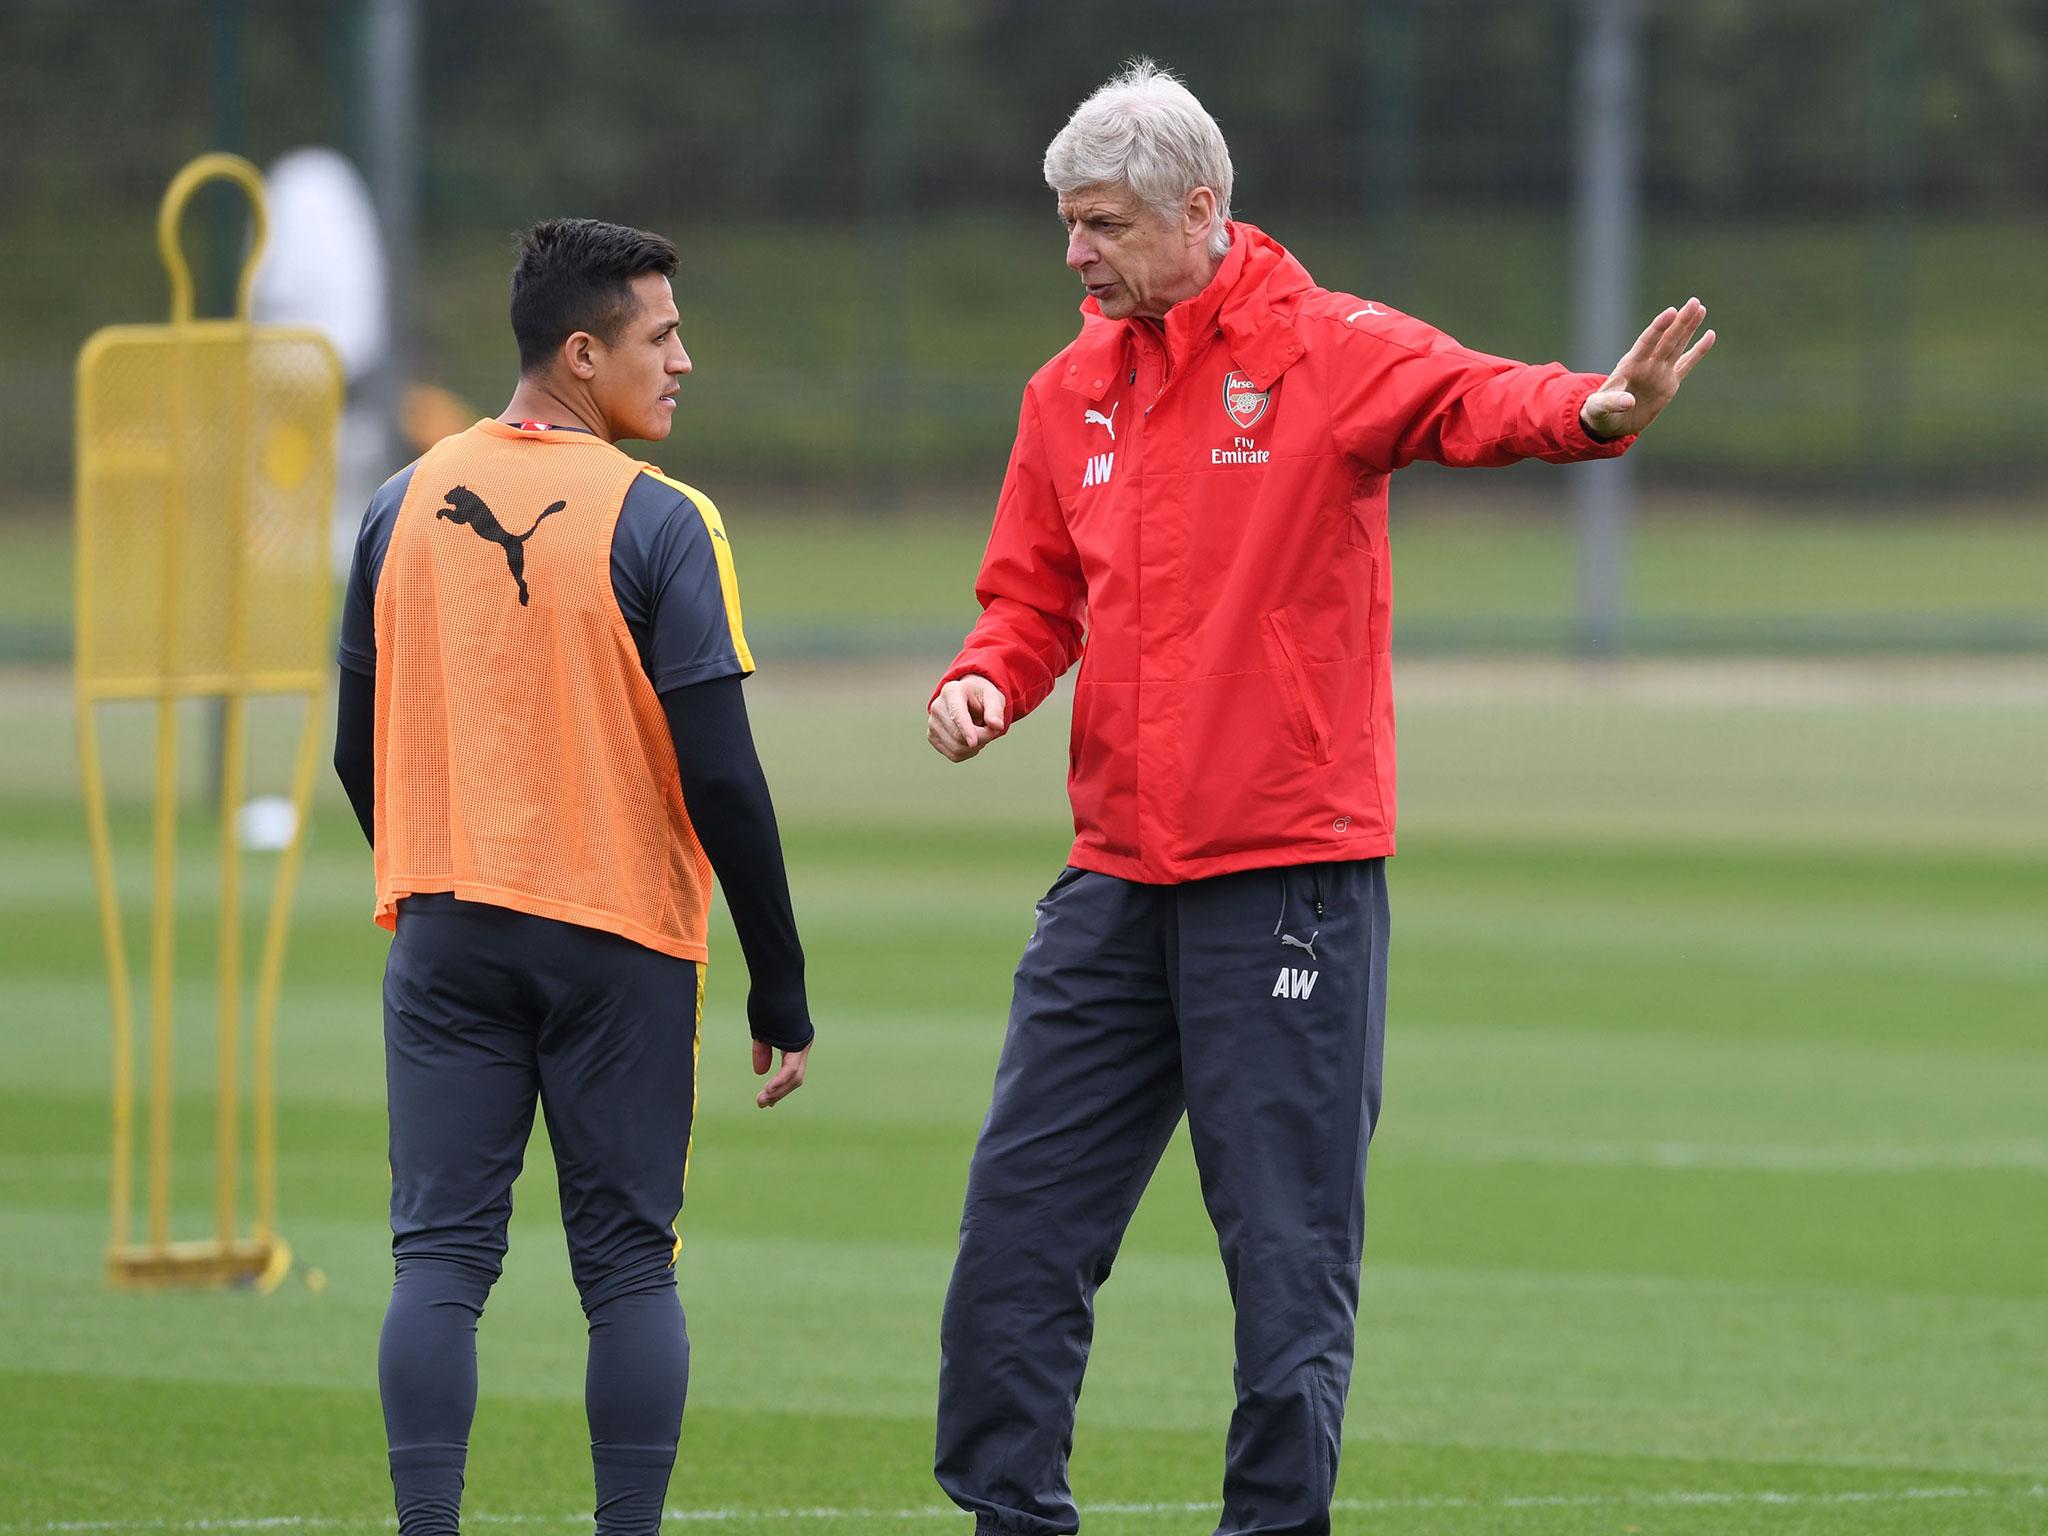 Arsene Wenger and Alexis Sanchez in training together